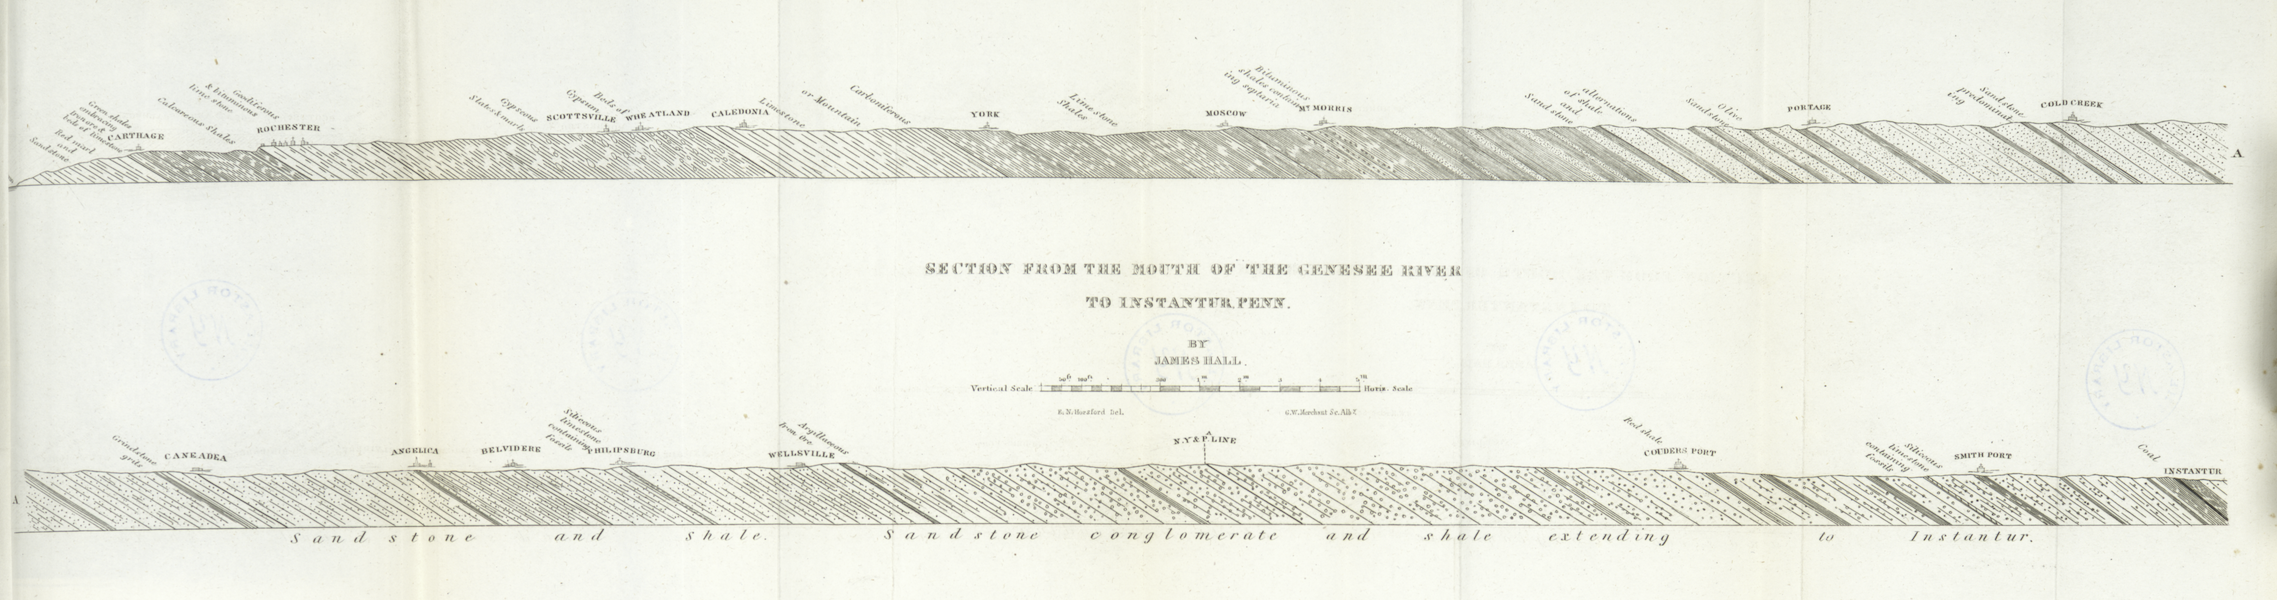 Views of the Adirondack Mountain Region - Section from the Mouth of the Genesee River to Instantur, Penn. (1838)